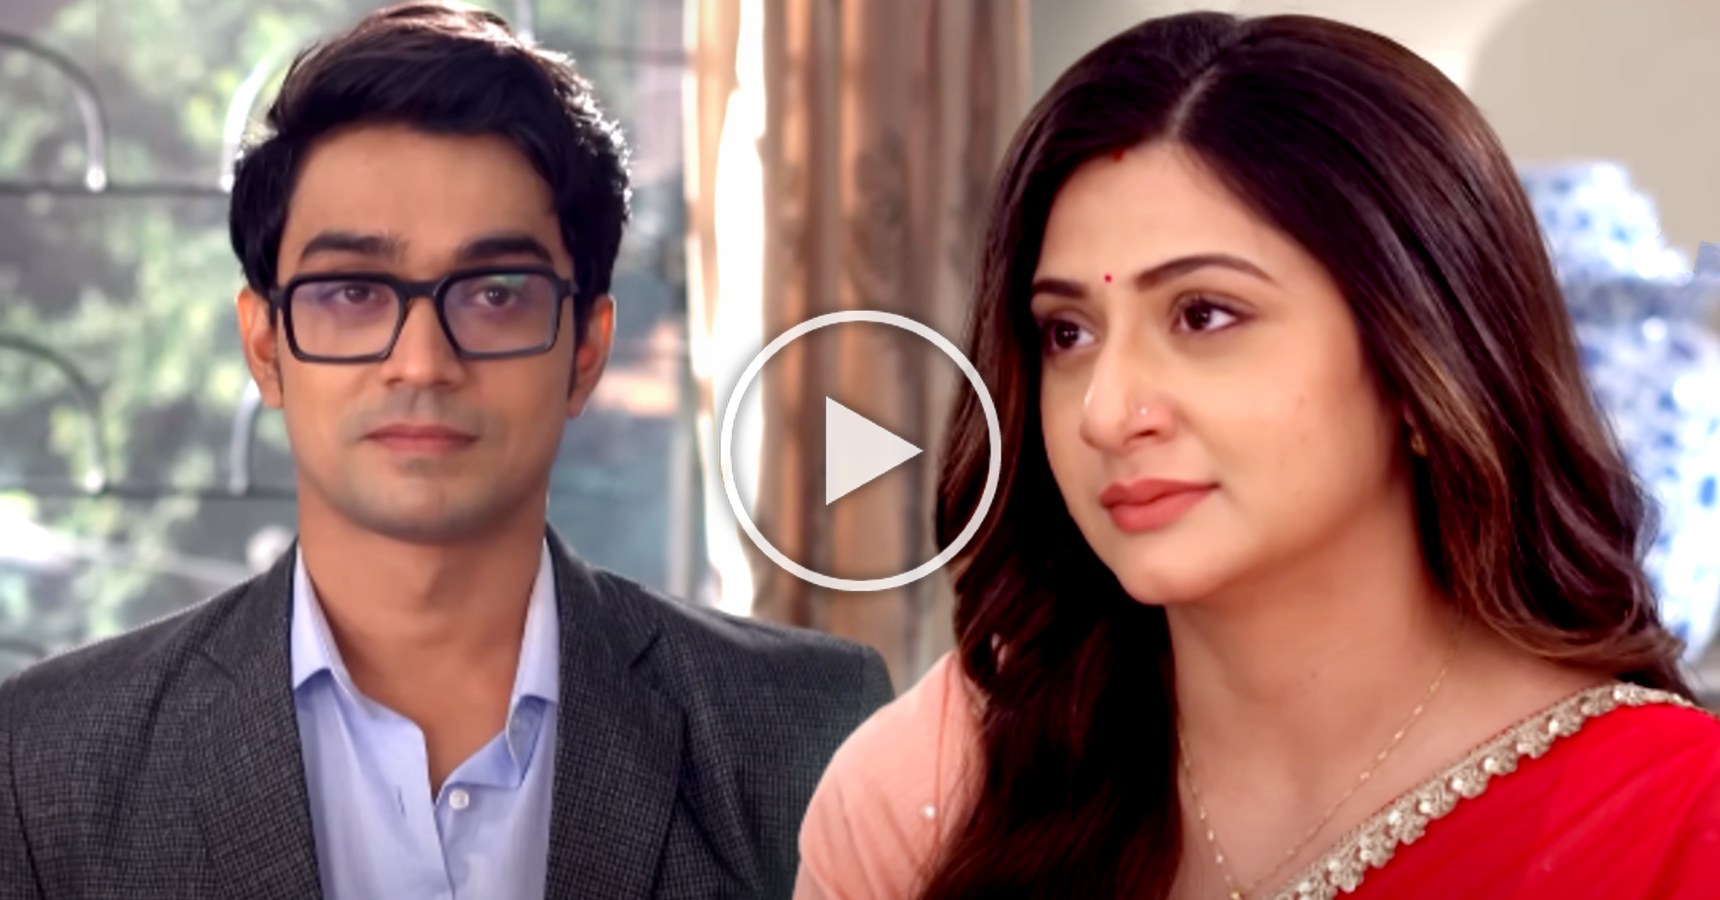 Dodo has fallen in love with Mou, new twist coming up in Star Jalsha’s Meyebela